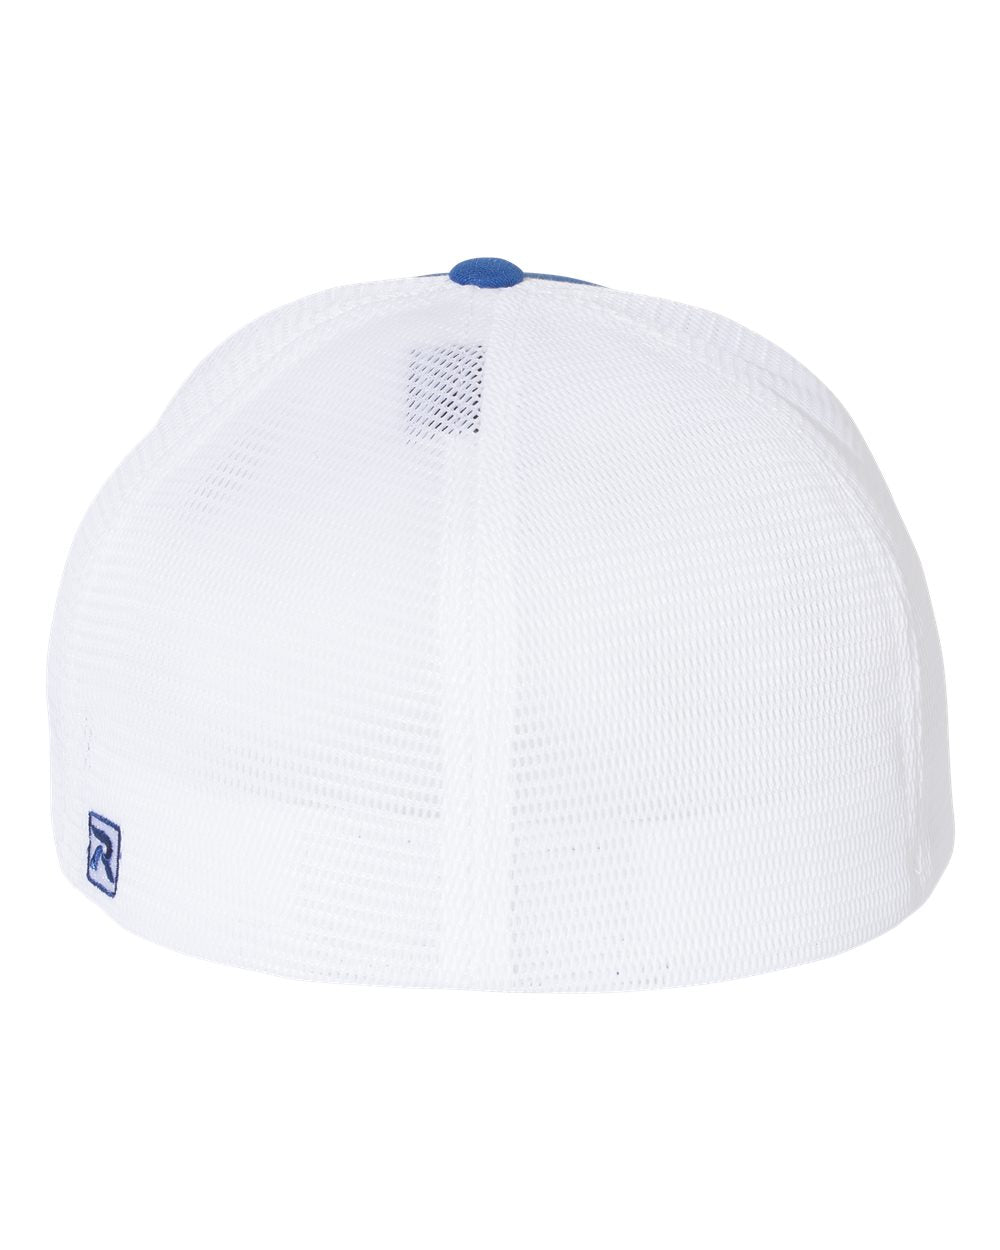 Richardson Fitted Pulse Customized Sportmesh with R-Flex Caps, Royal White Split